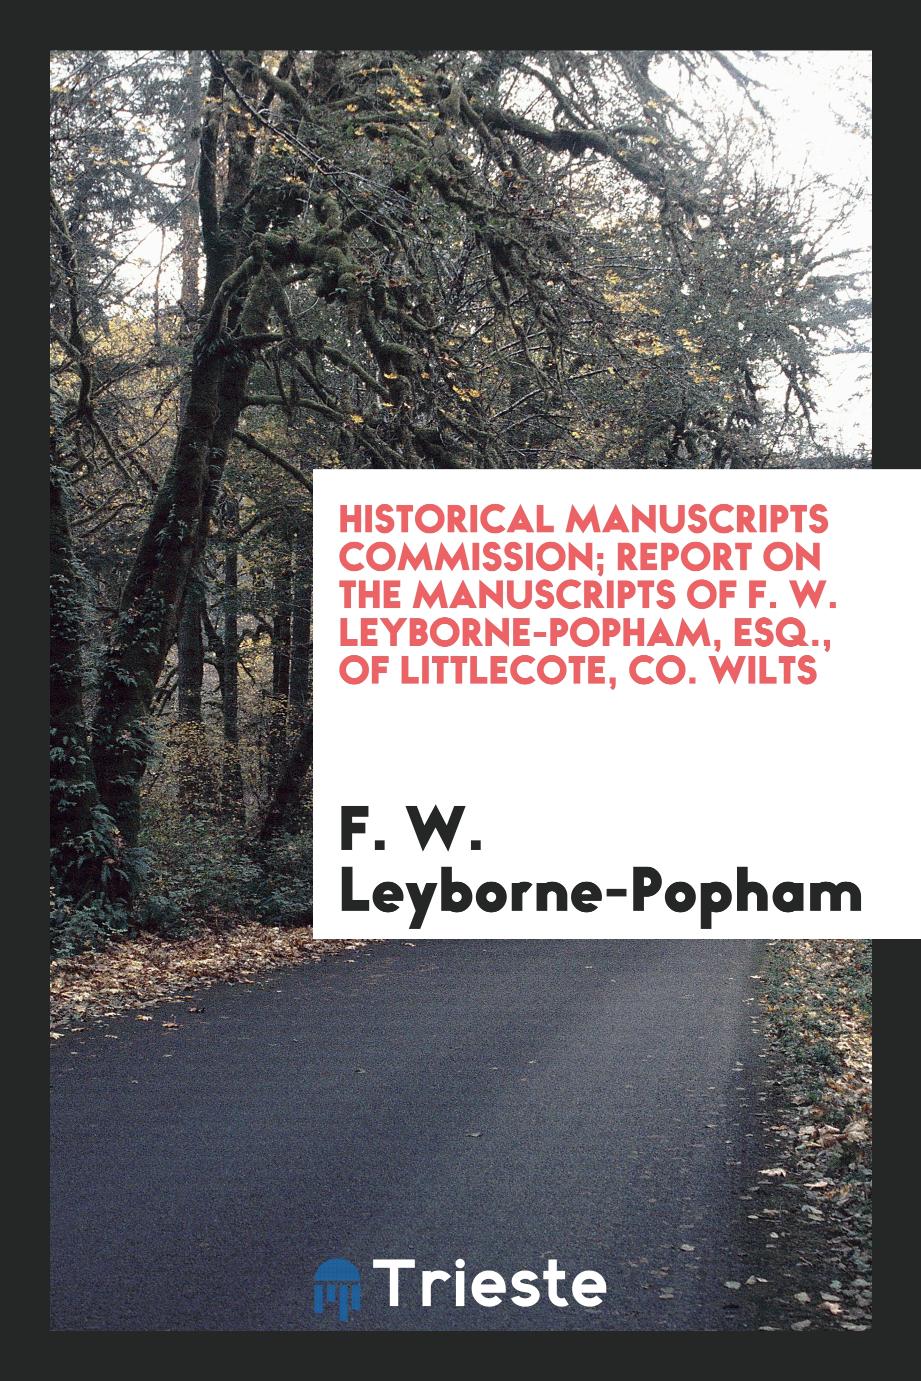 Historical Manuscripts Commission; Report on the Manuscripts of F. W. Leyborne-Popham, Esq., of Littlecote, Co. Wilts